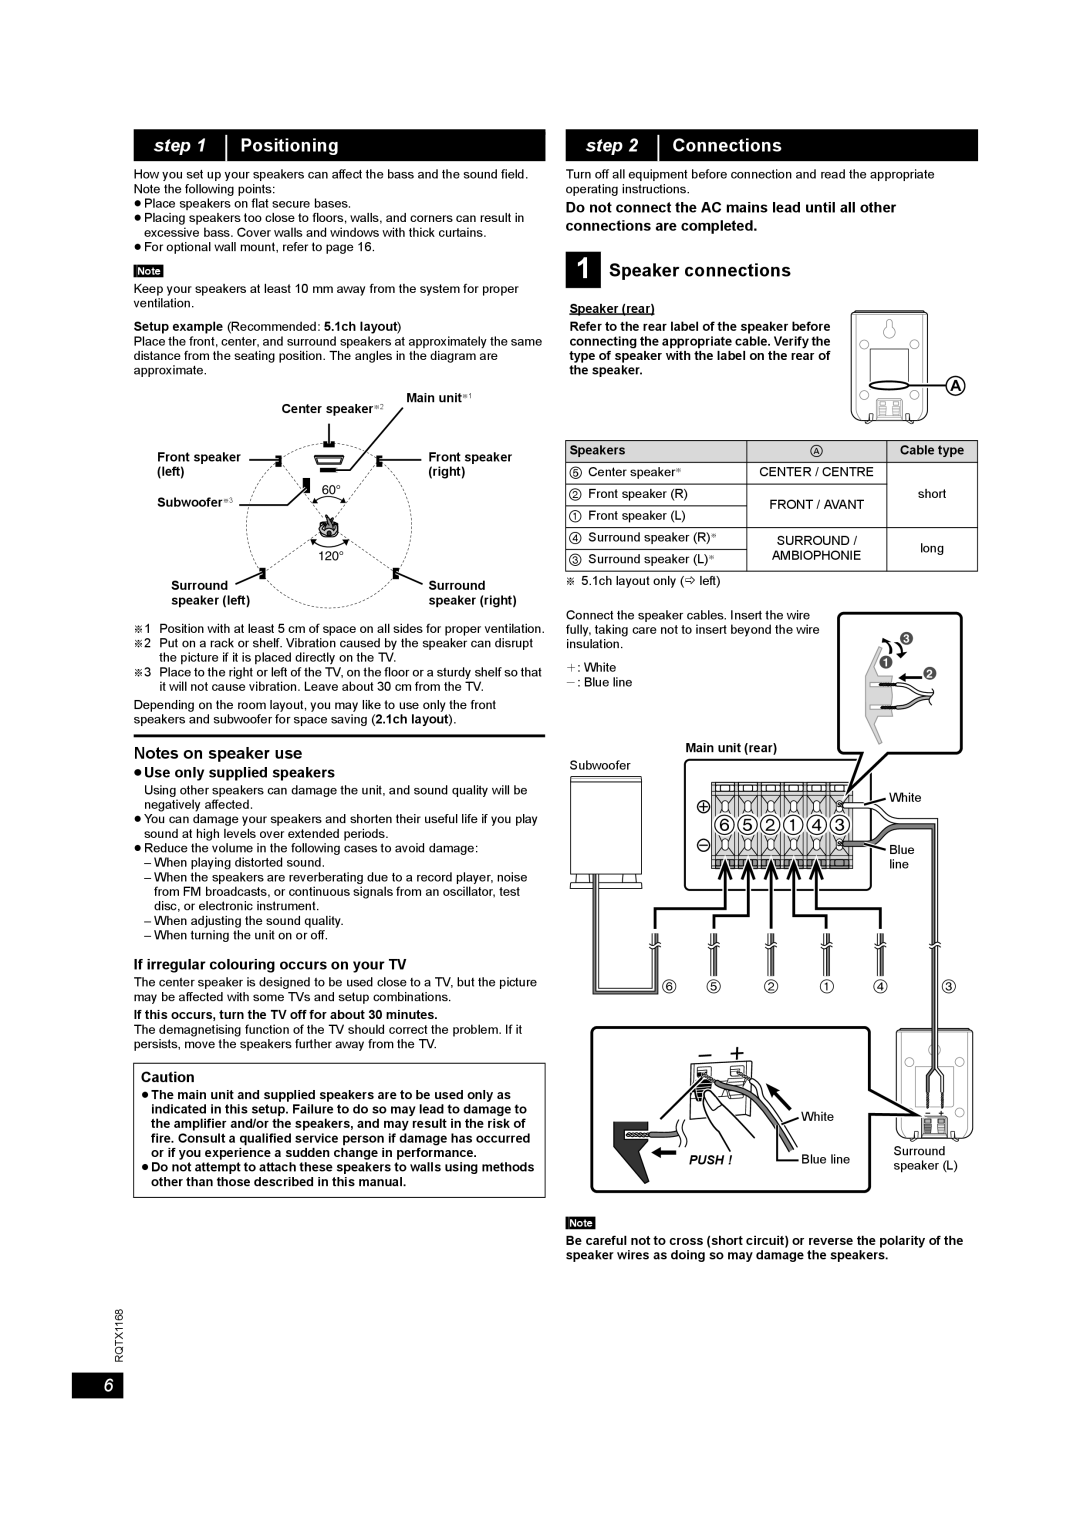 Panasonic SC-PT22 , step, Positioning, Connections, Speaker connections, Notes on speaker use, i White, j Blue line 